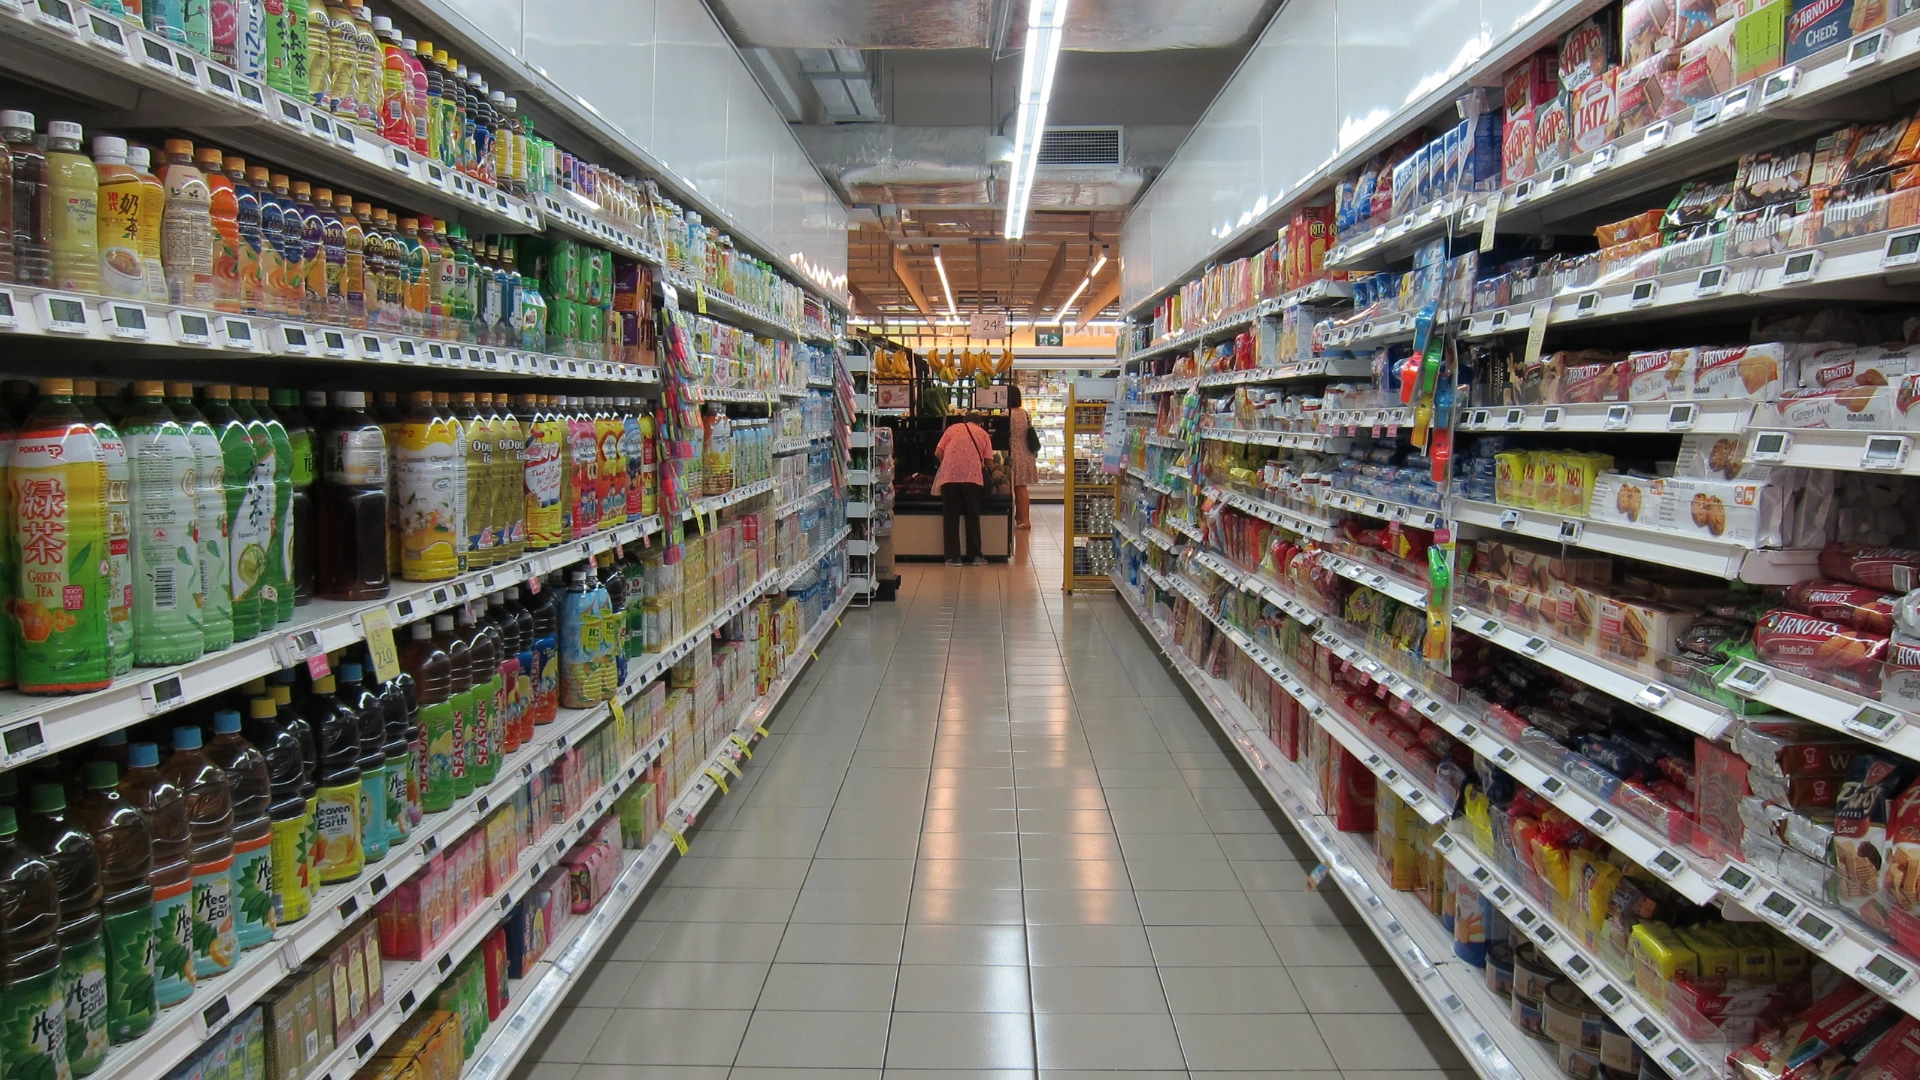 Grocery chain protects staff and inventory with Informatica’s cyber innovations